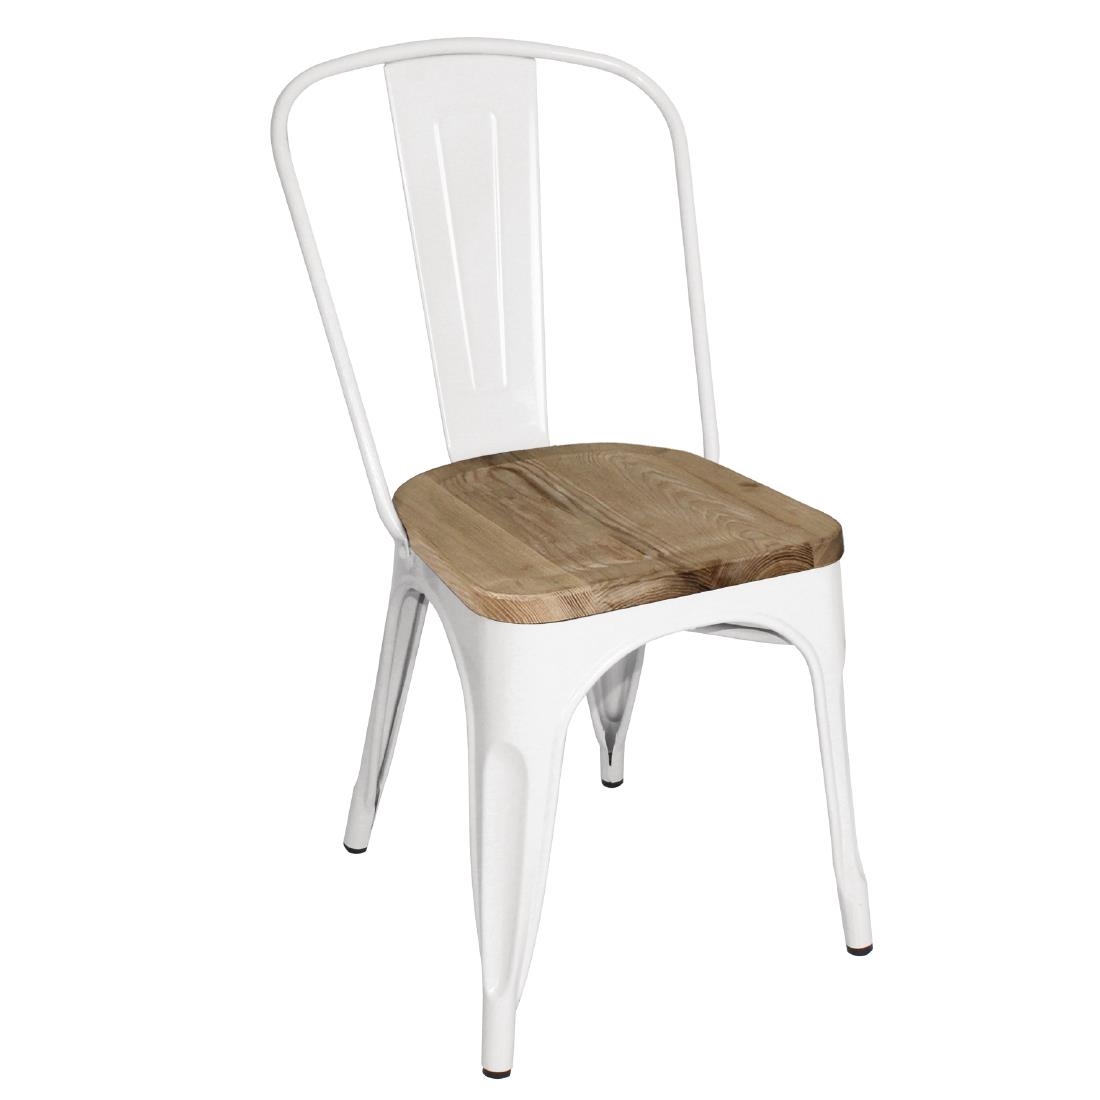 Bolero Bistro Side Chairs with Wooden Seat Pad White (Pack of 4)